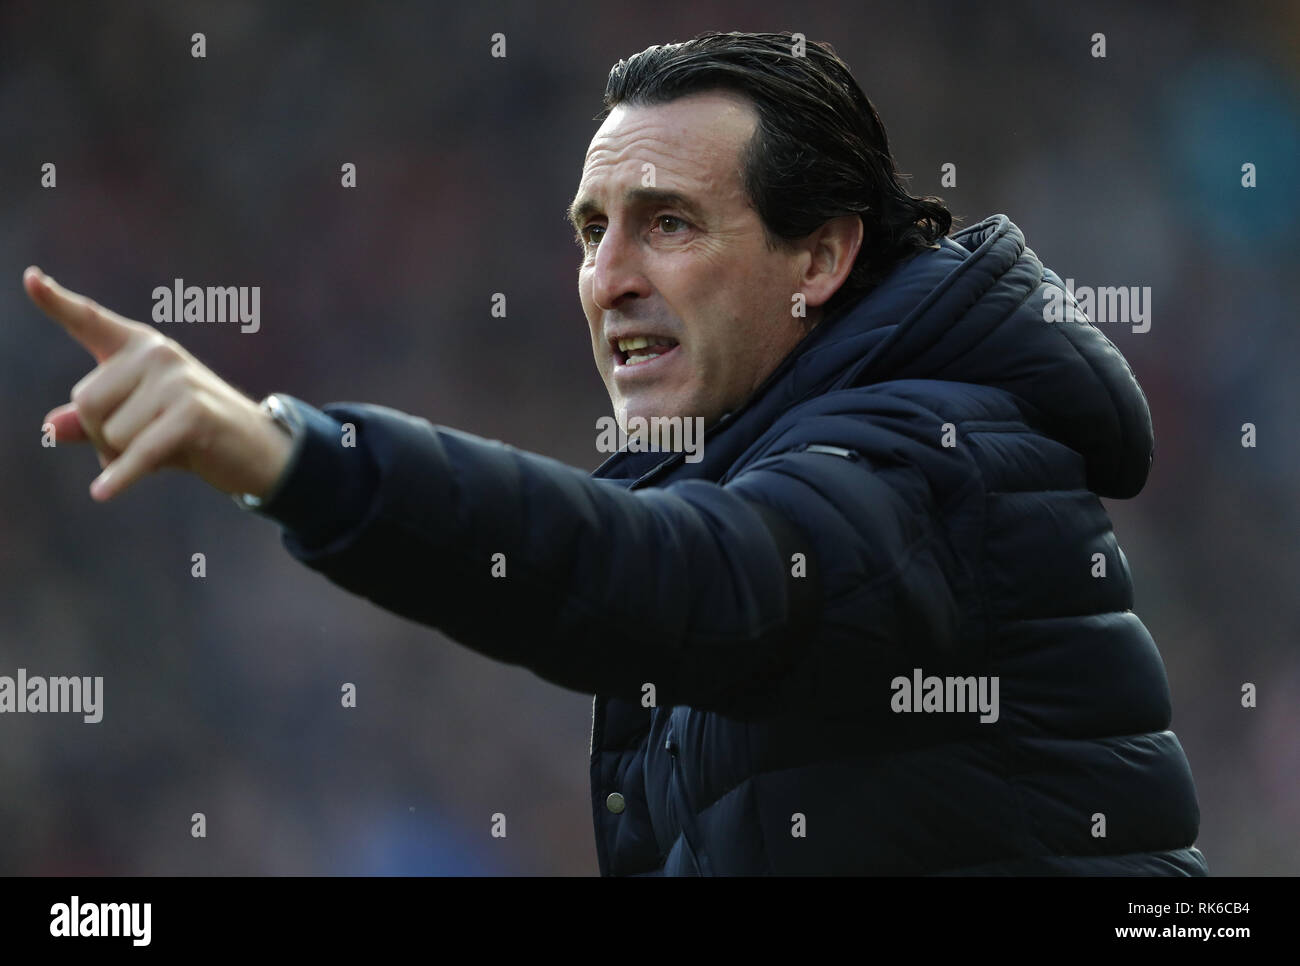 UNAI EMERY, Arsenal FC MANAGER, HUDDERSFIELD TOWN FC V ARSENAL FC, Premier League, 2019 Banque D'Images